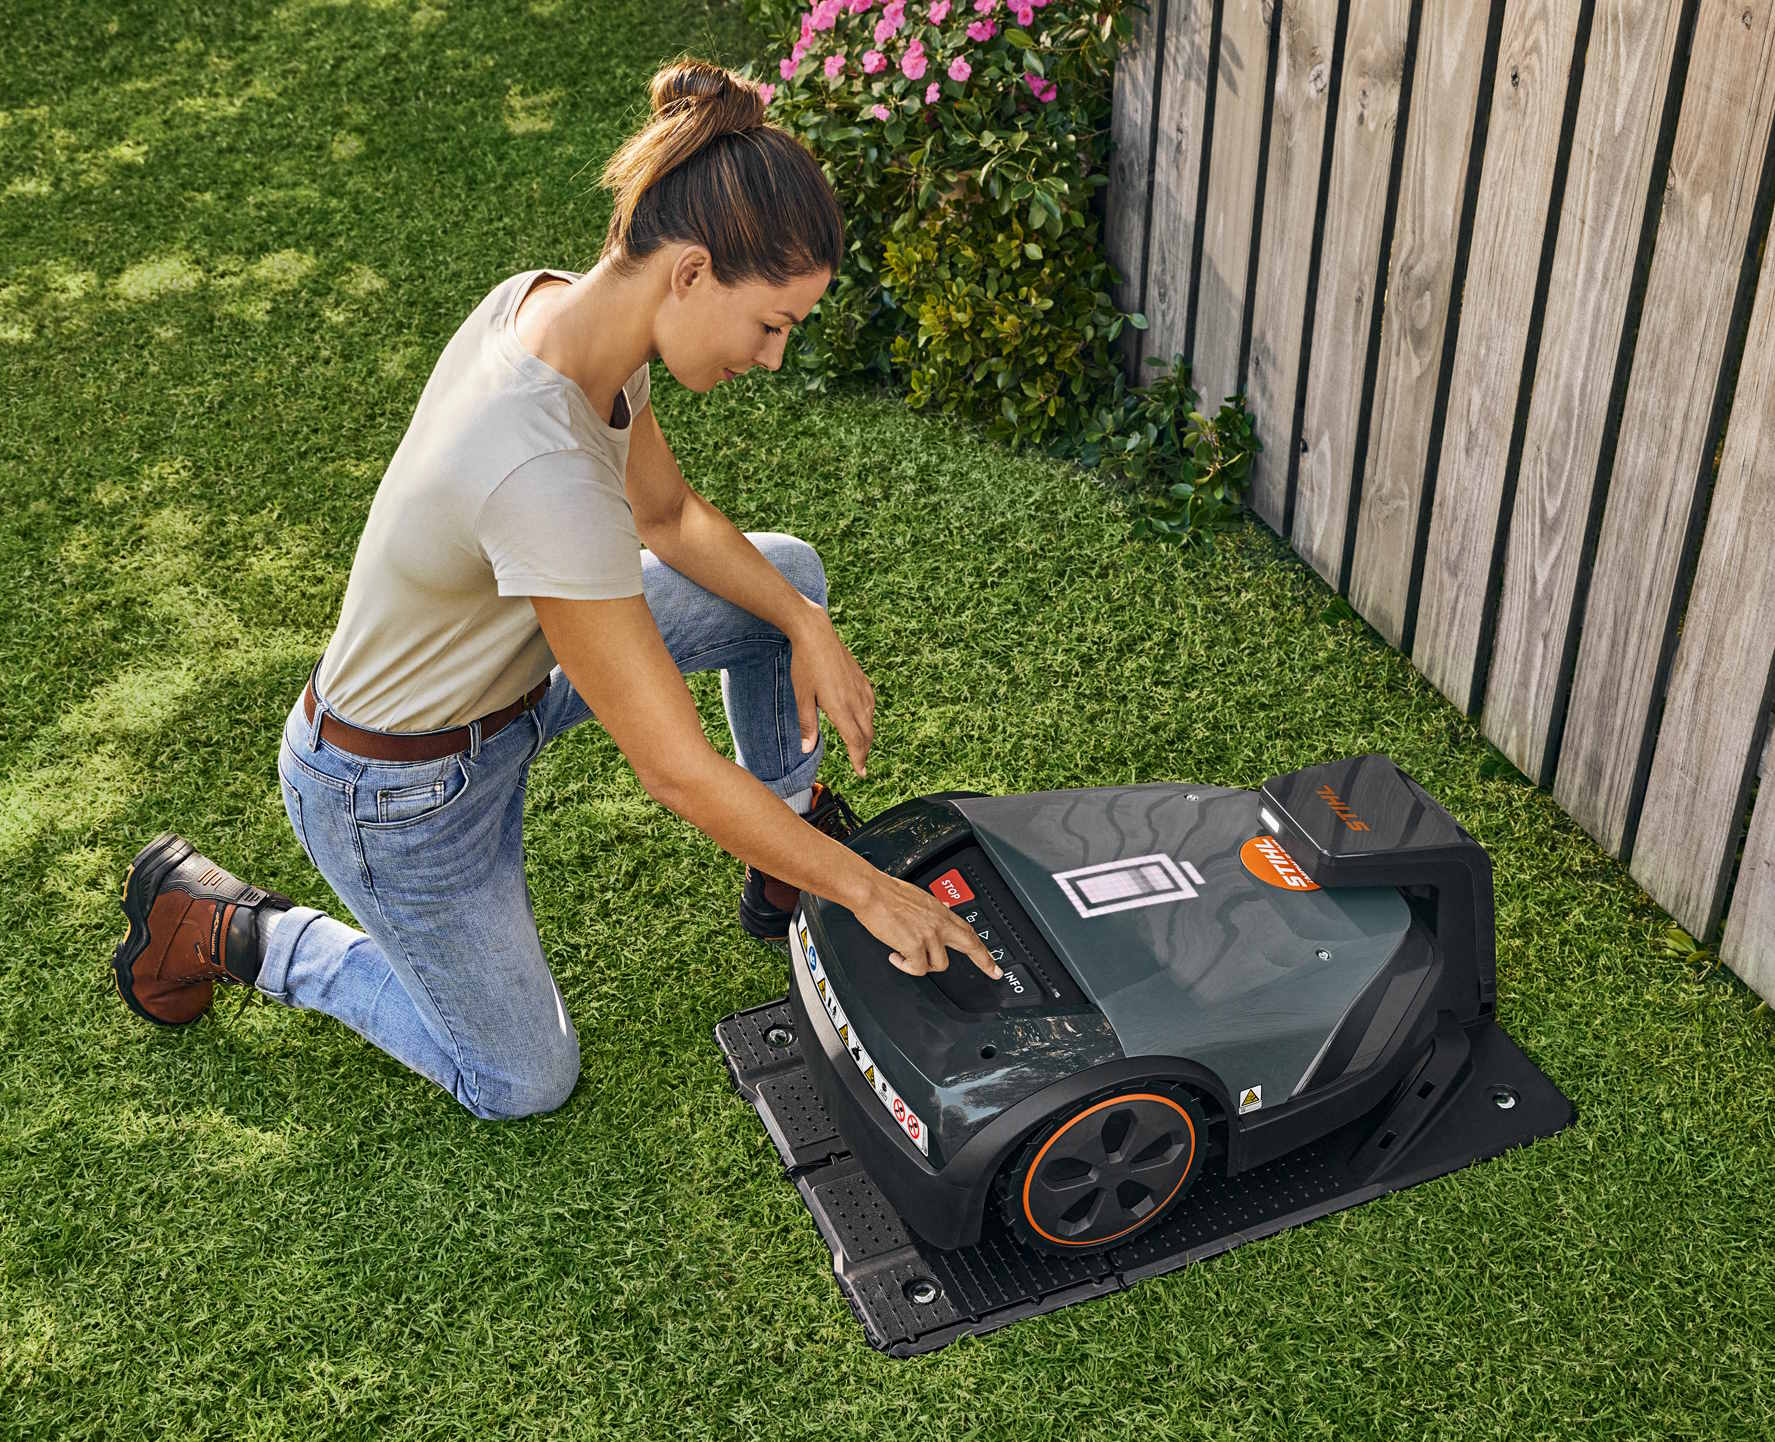 STIHL iMOW new robot lawn mower pricing unveiled -  News